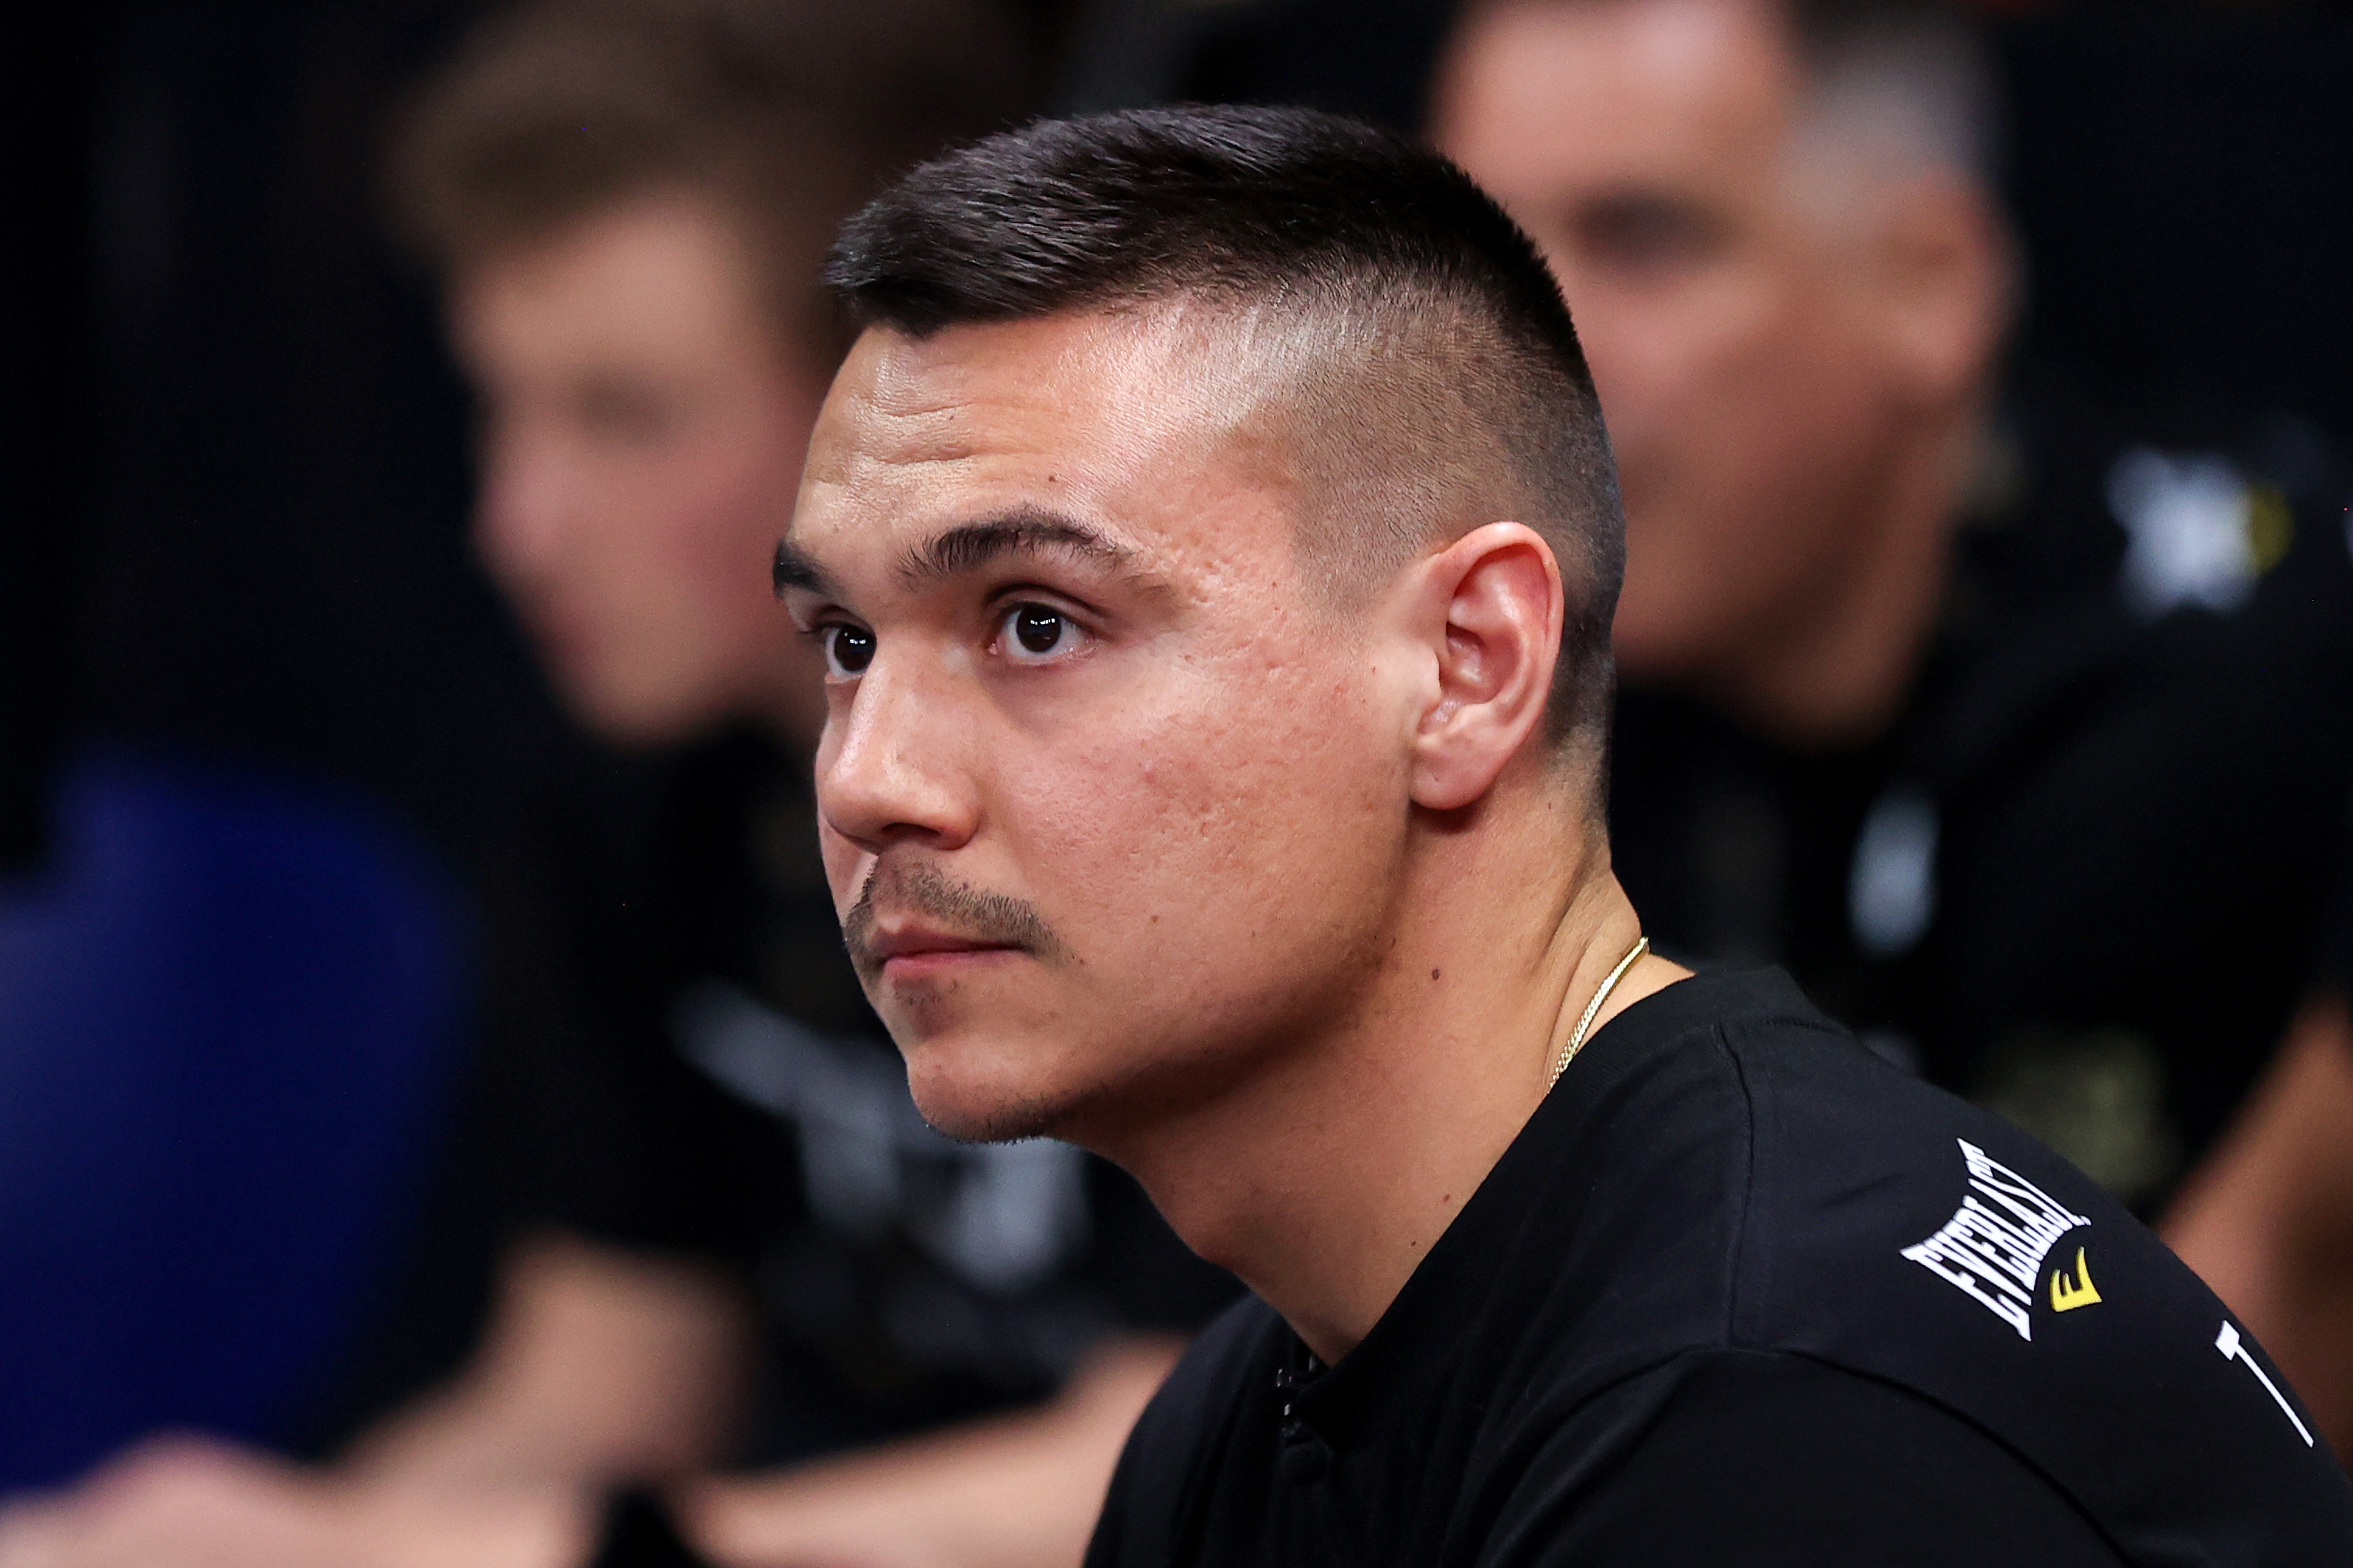 Tim Tszyu says Tony Harrison will be shocked by his ring IQ and ability on fight night.